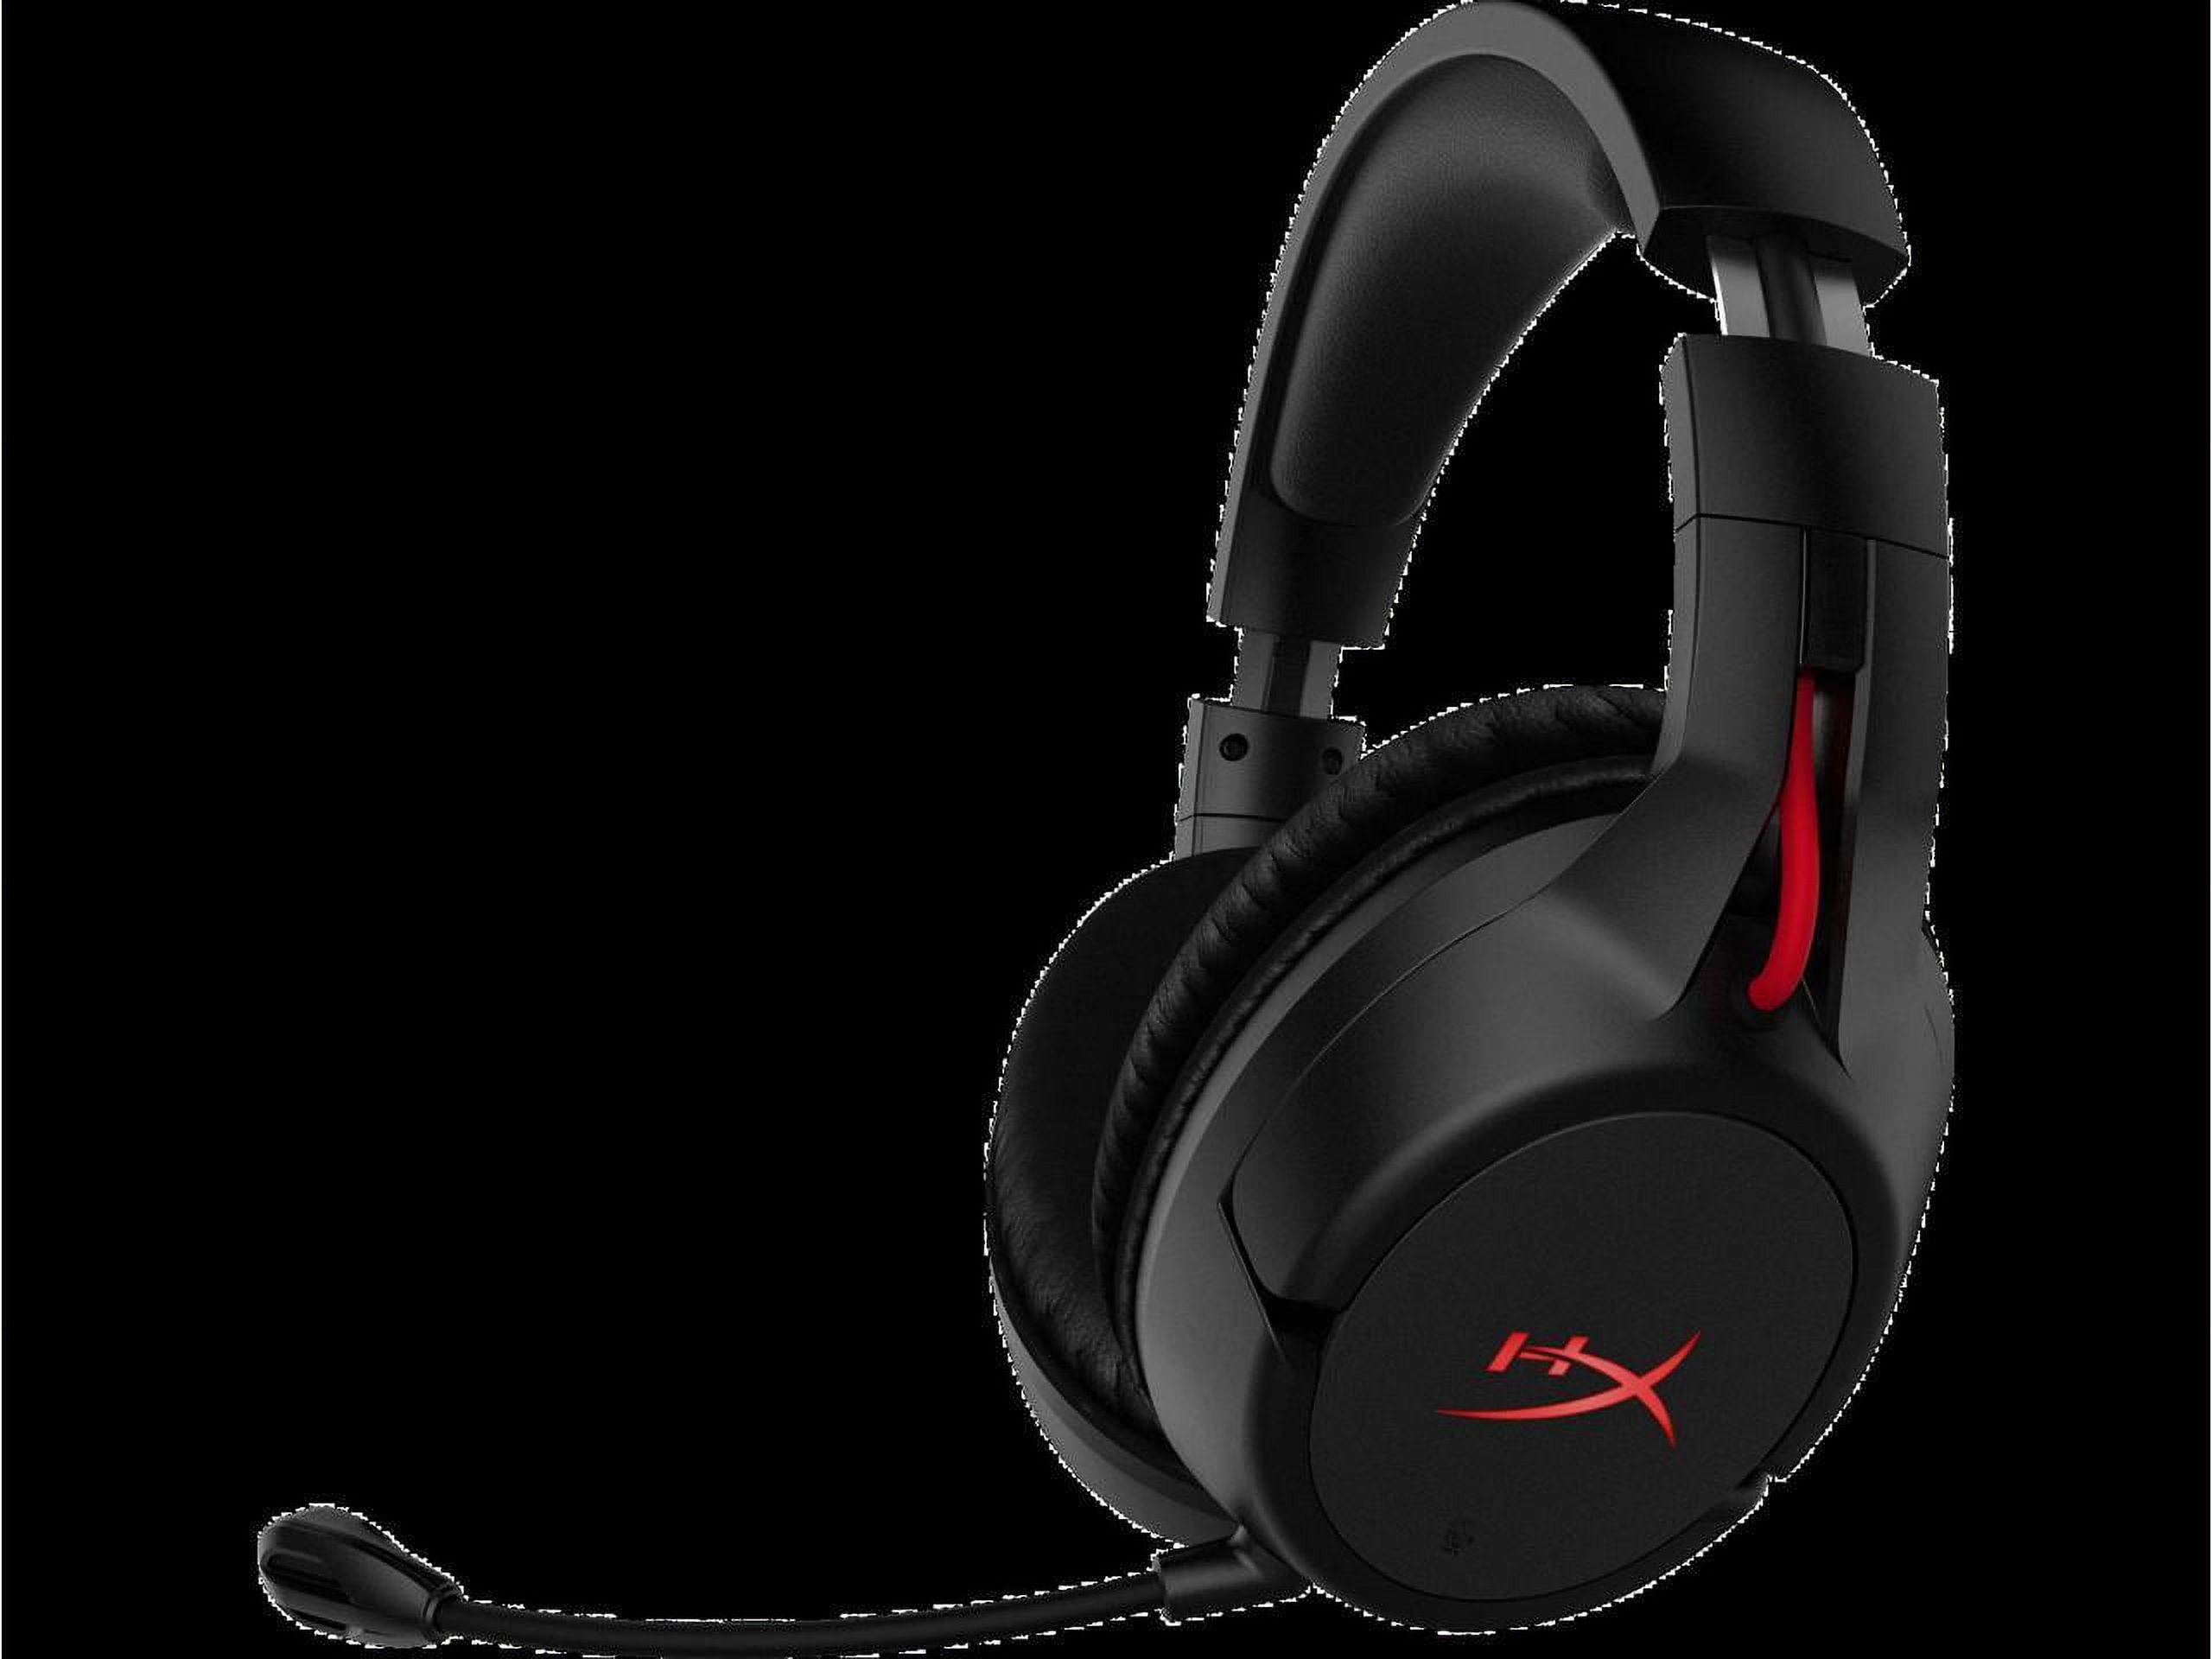 HyperX Cloud Flight - Wireless Gaming Headset, Long Lasting Battery up to  30 Hours, Detachable Noise Cancelling Microphone, Red LED Light,  Comfortable